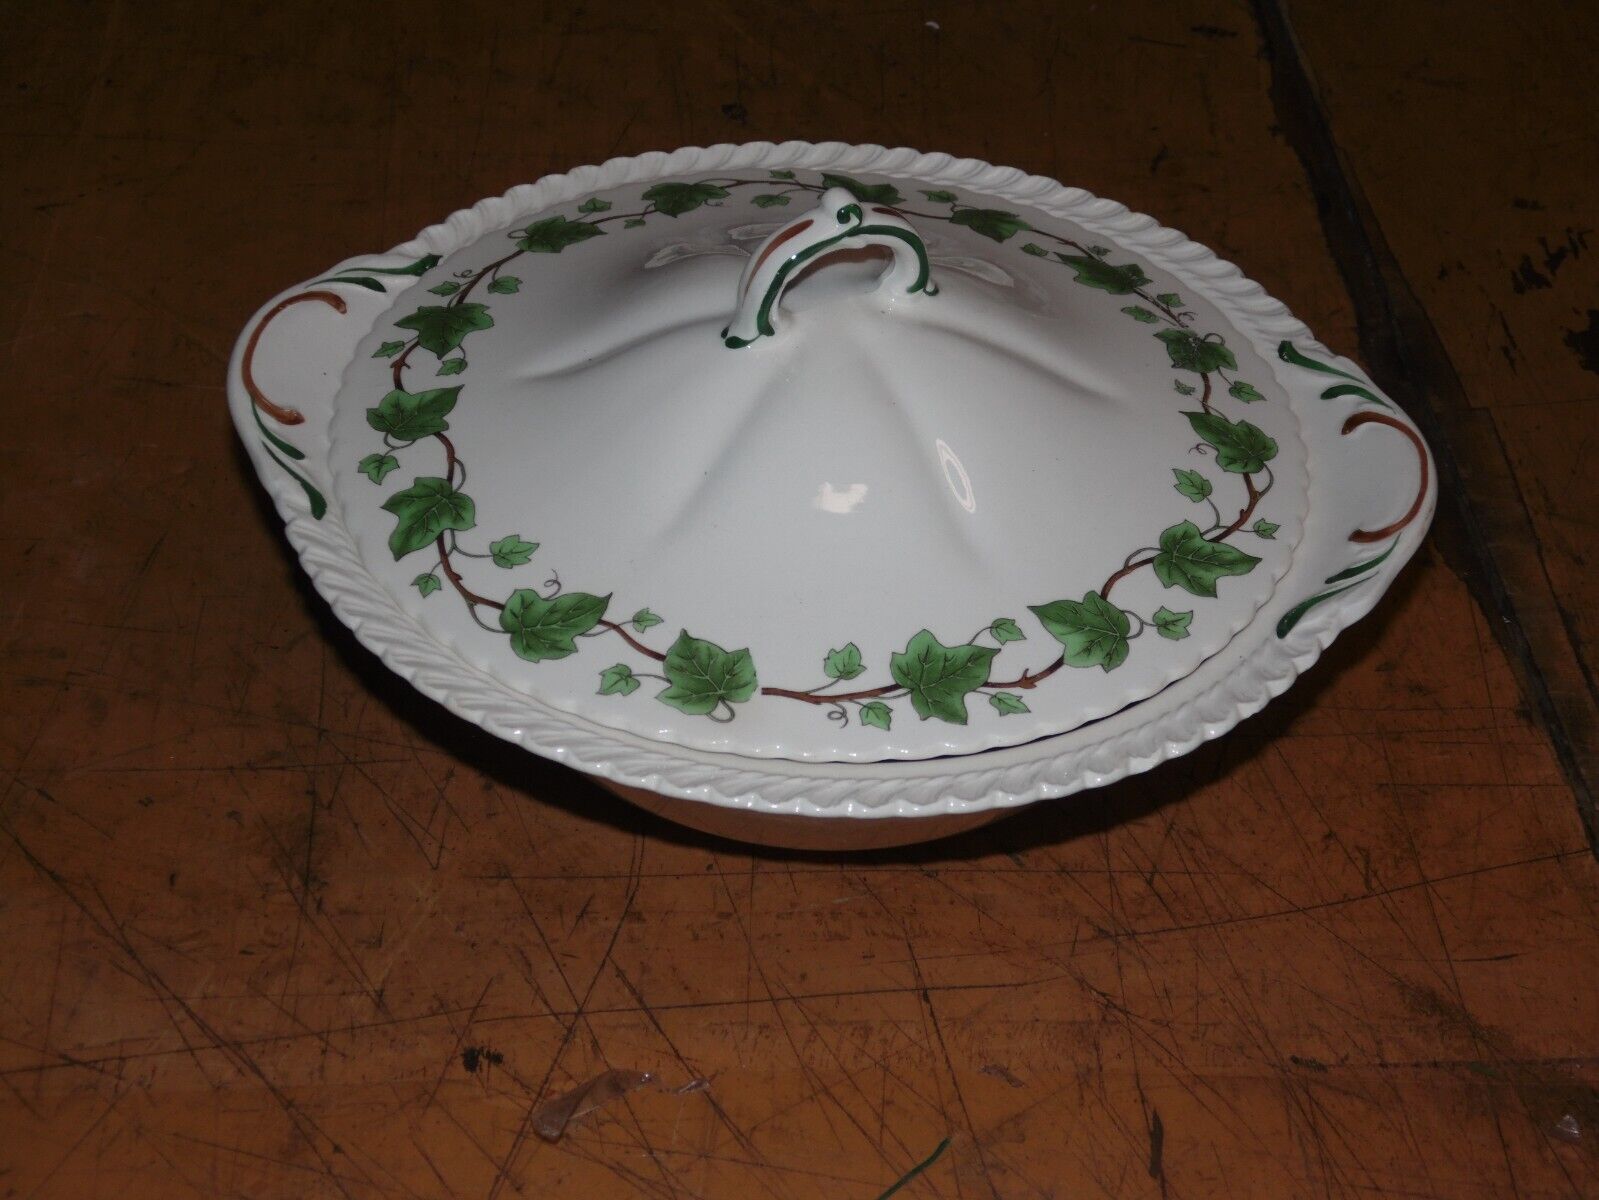 Harker Royal Gadroon - Ivy - Serving Bowl with Lid